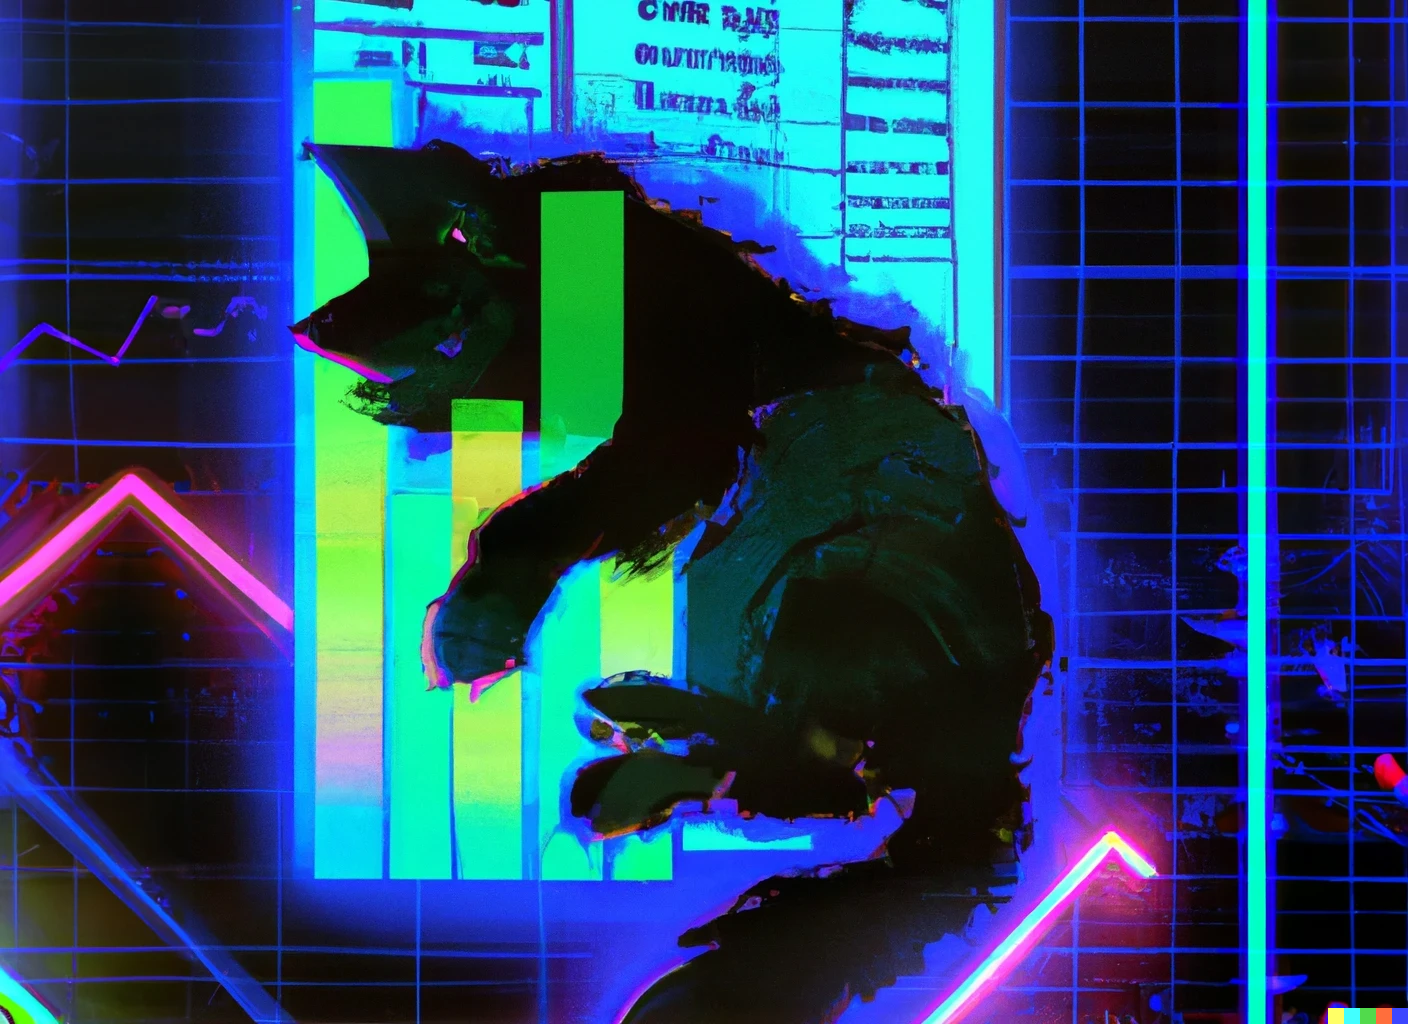 An AI-generated image of a black cat playing with a bar chart in the style of a cyberpunk painting. The bar chart is neon green and the overall effect is vibrant and electronic, like upbeat synthesized music.